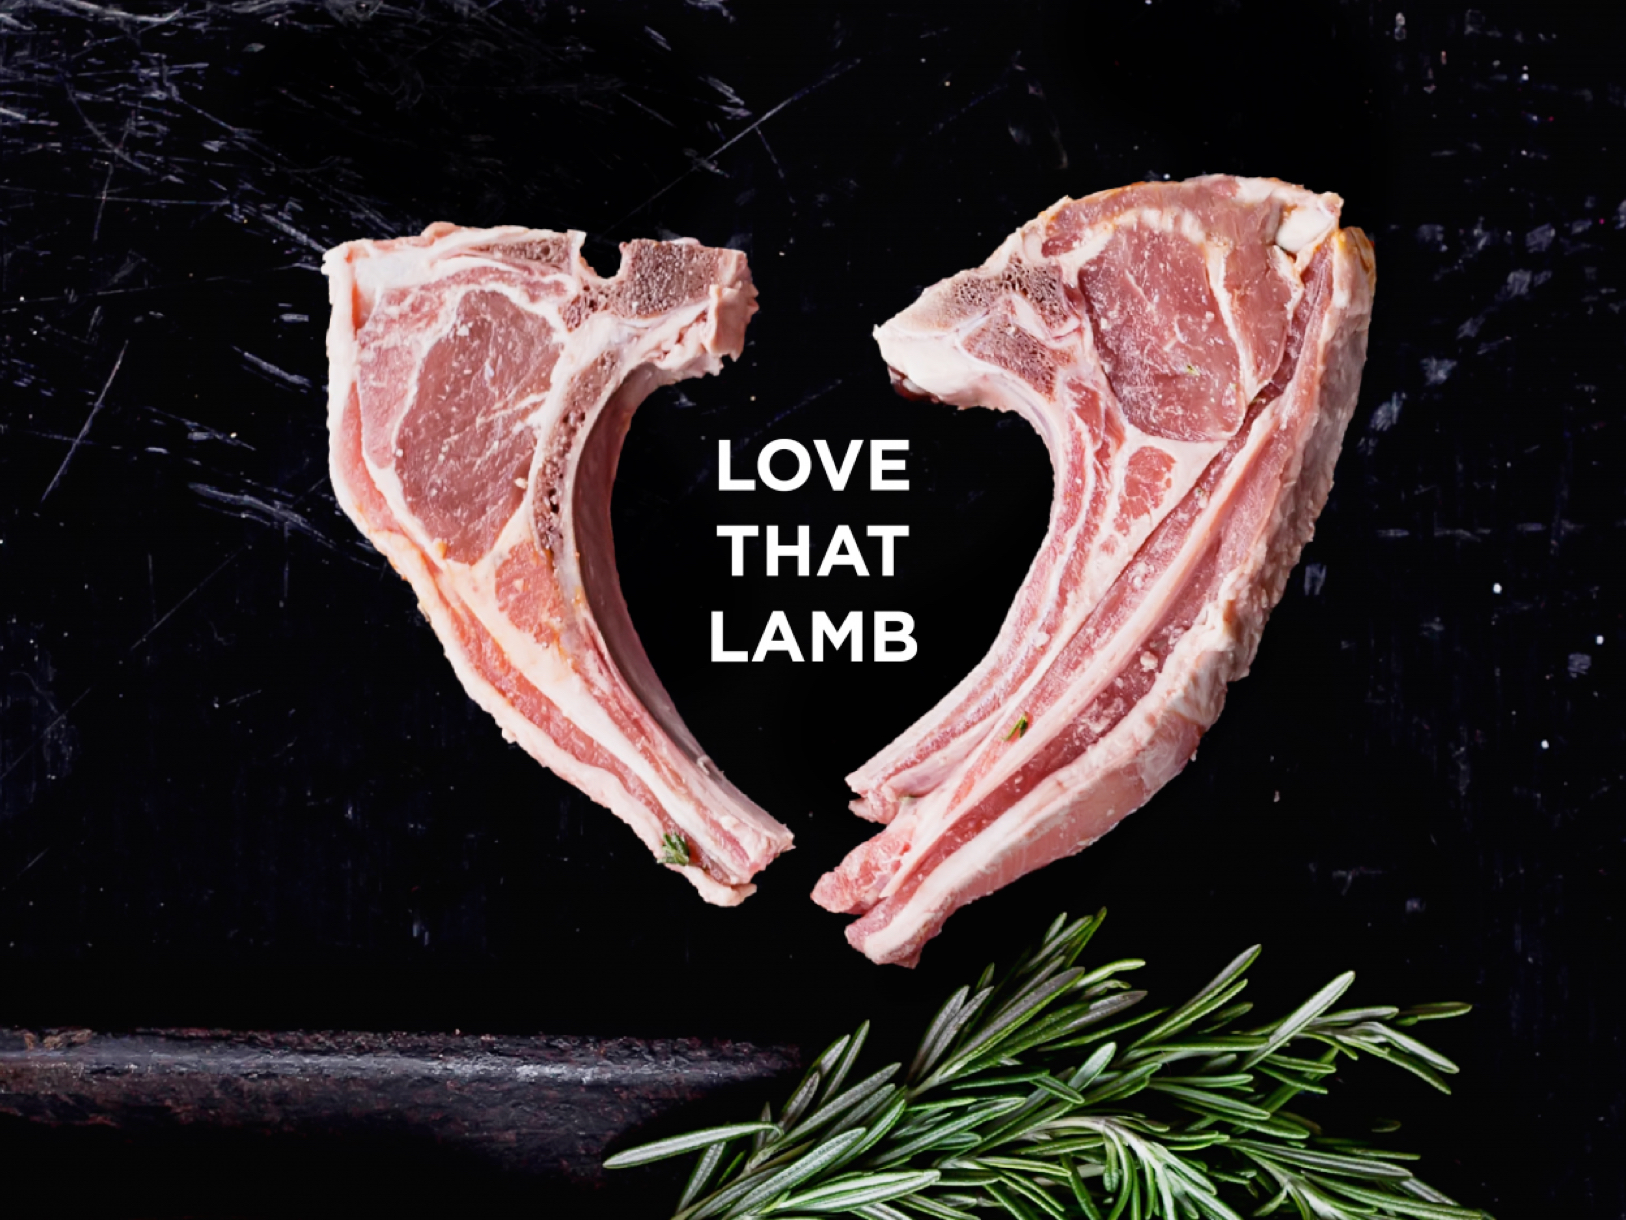 Love that lamb - Campaign image - 2 lamb cutlets on a black background with a sprig of rosemary